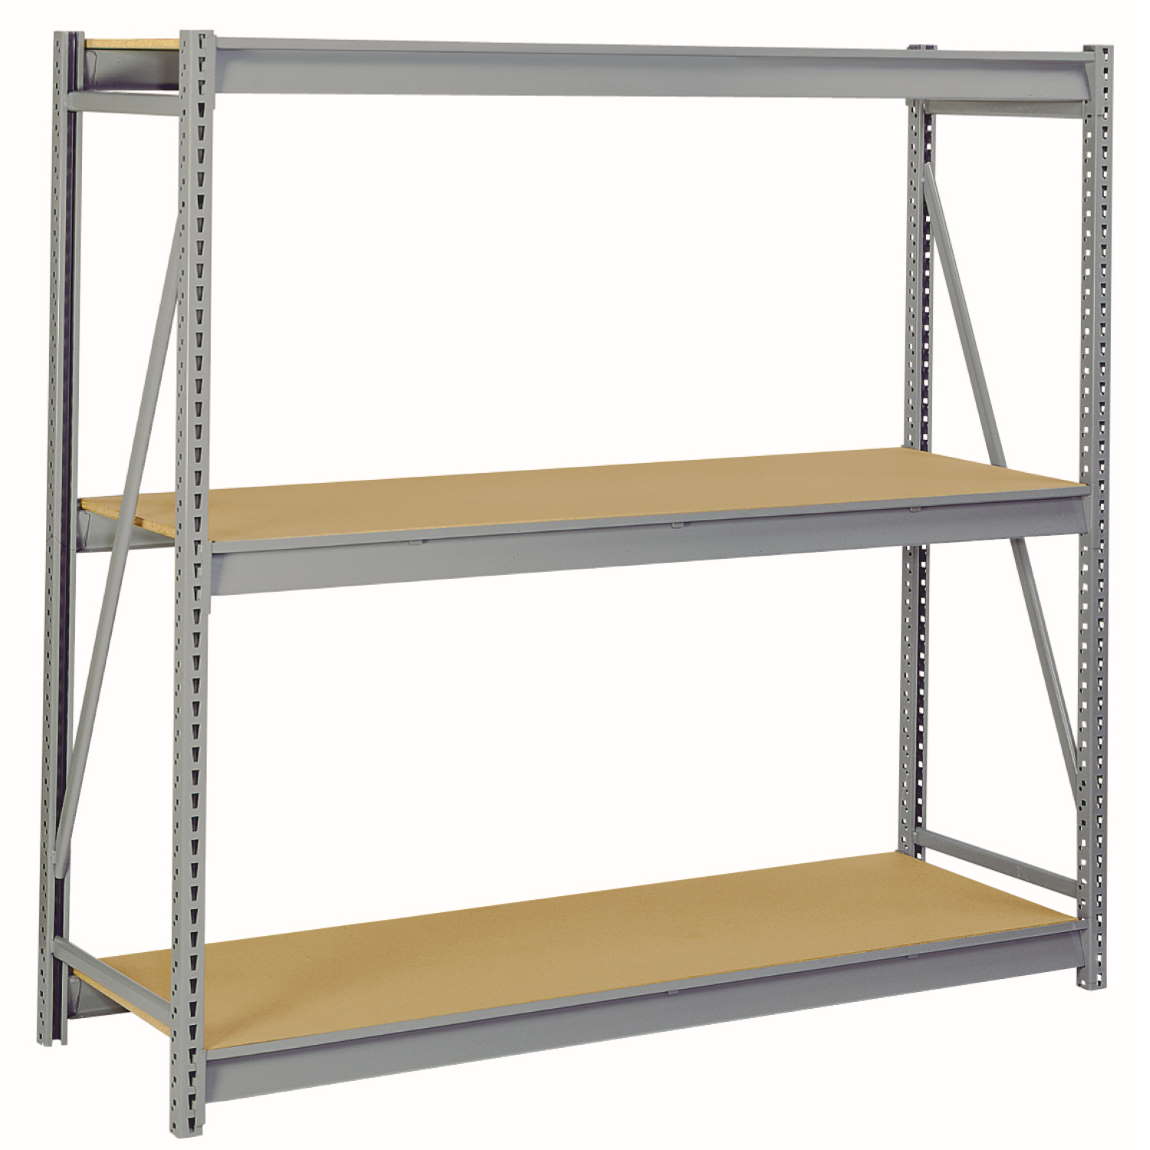 Bulk Storage Racks with Particle Board Decking